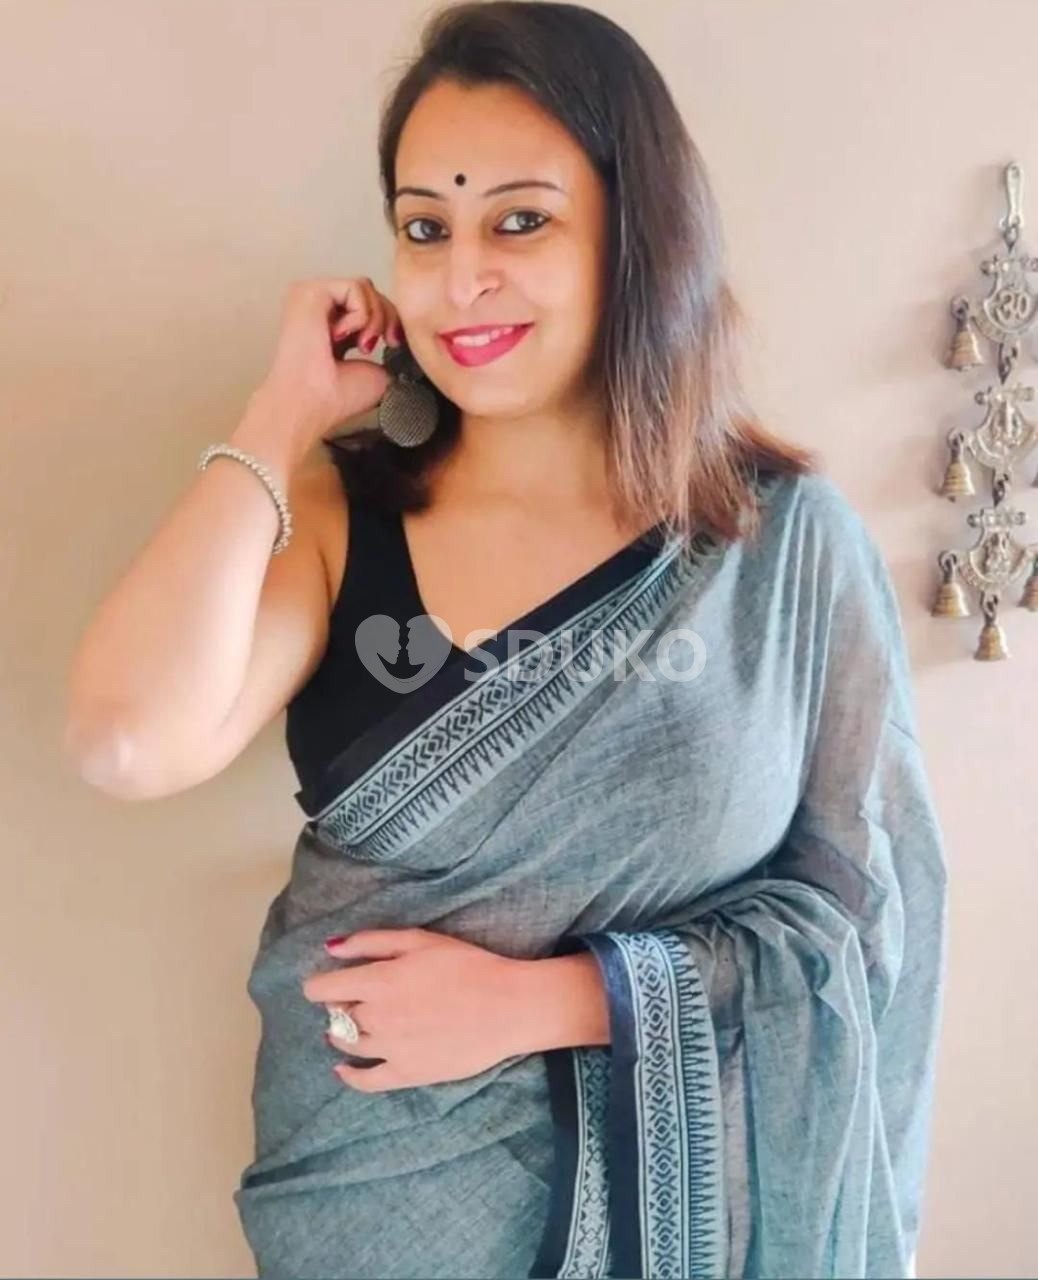 Anand.....✅😍 Myself kavya independent college call girl and hot busty available service gt Hi there✔️✔️